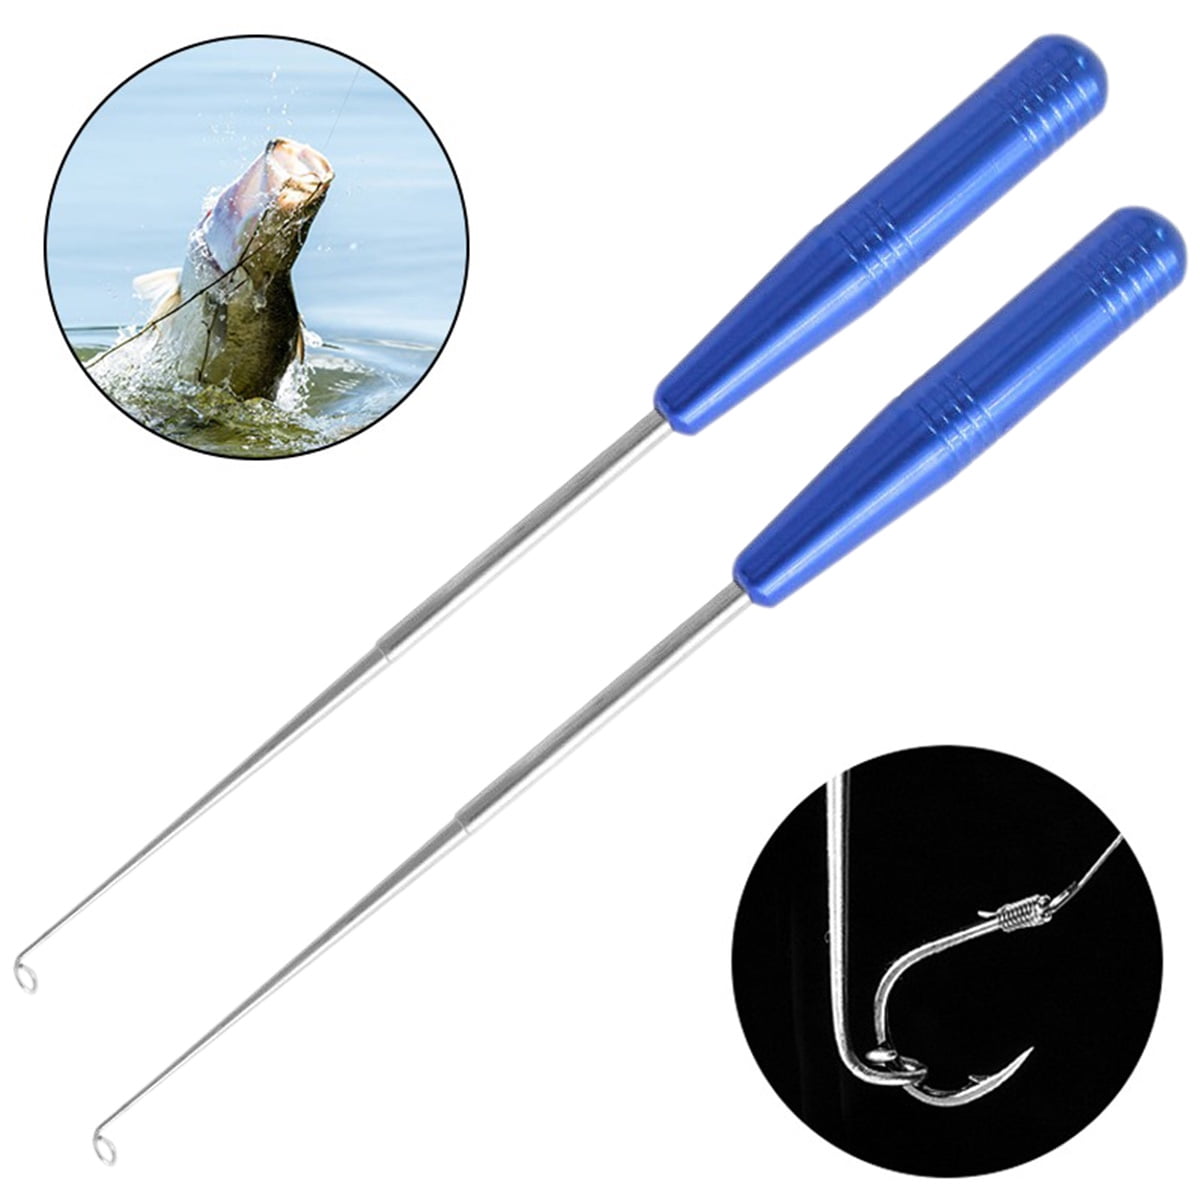 Hands DIY 2pcs Fish Hook Remover Fishing Hook Quick Removal